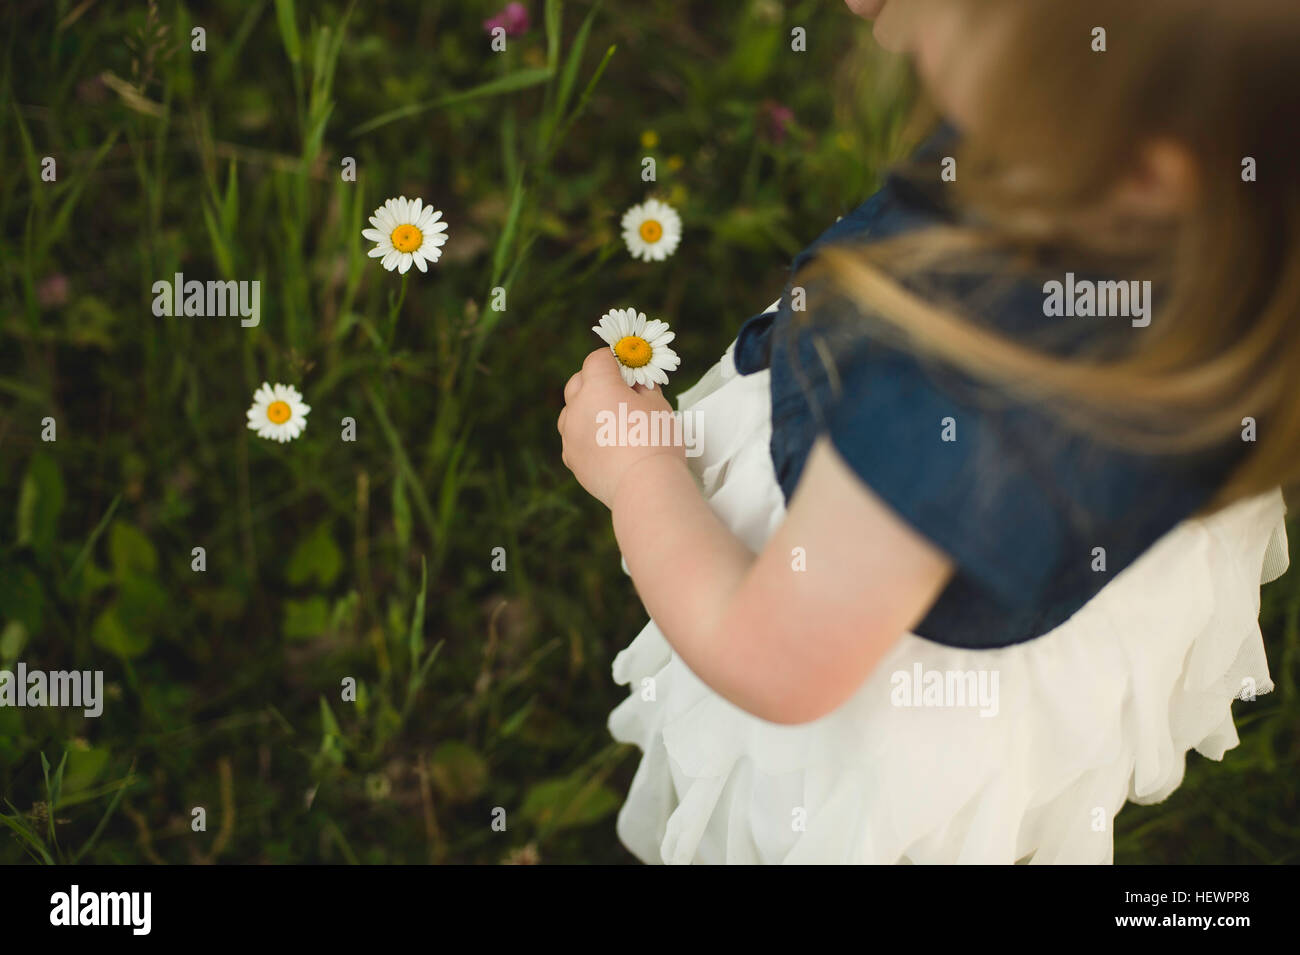 Over shoulder view of girl picking daisy flowers Stock Photo